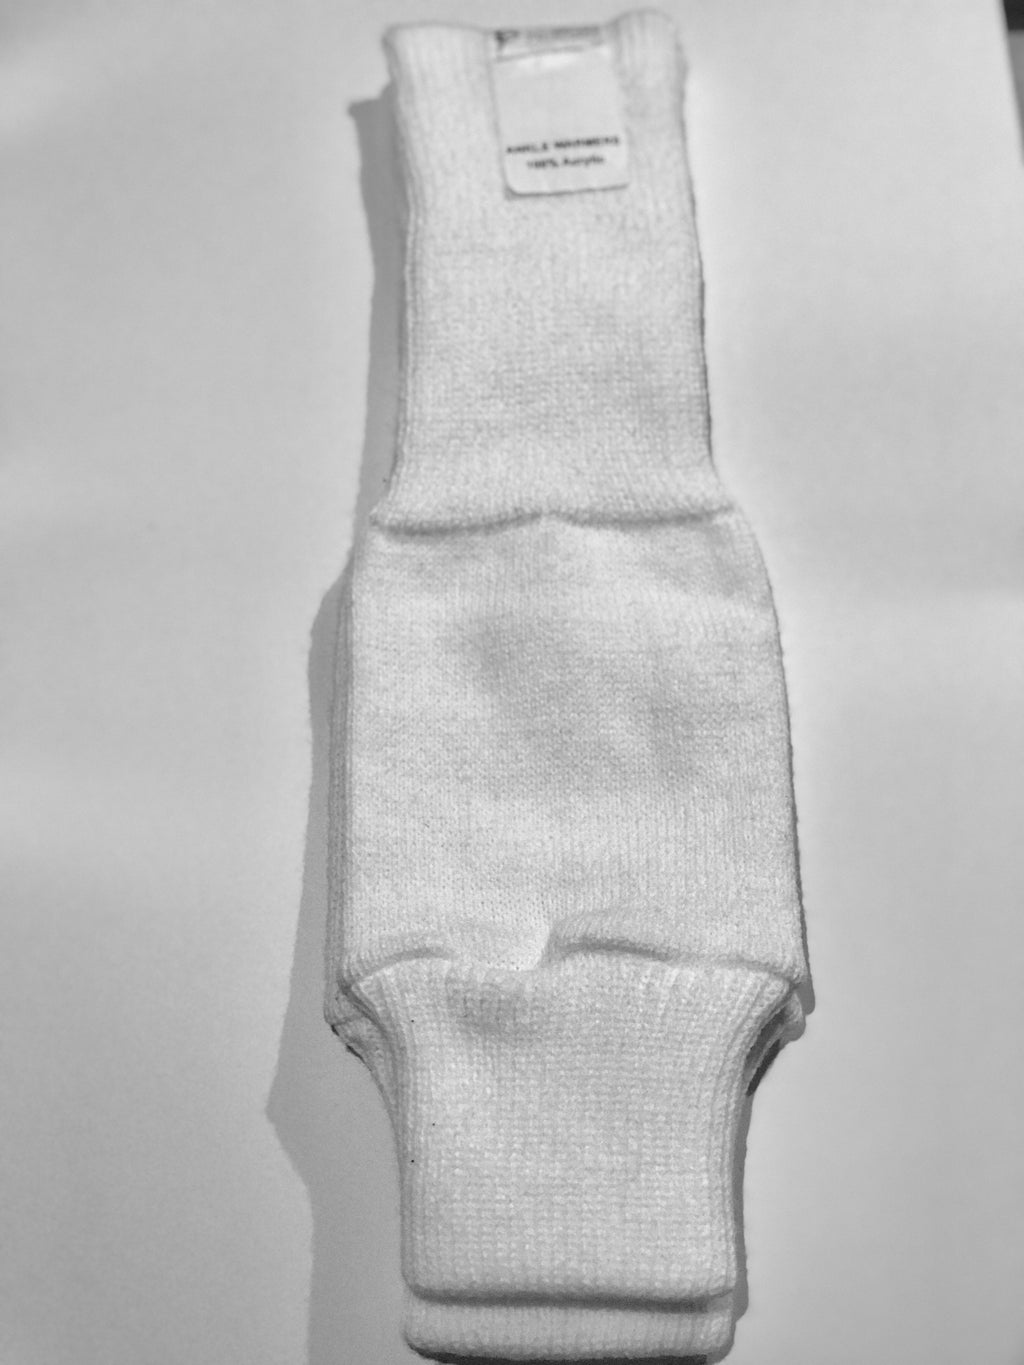 Ankle Warmers - White - Adults